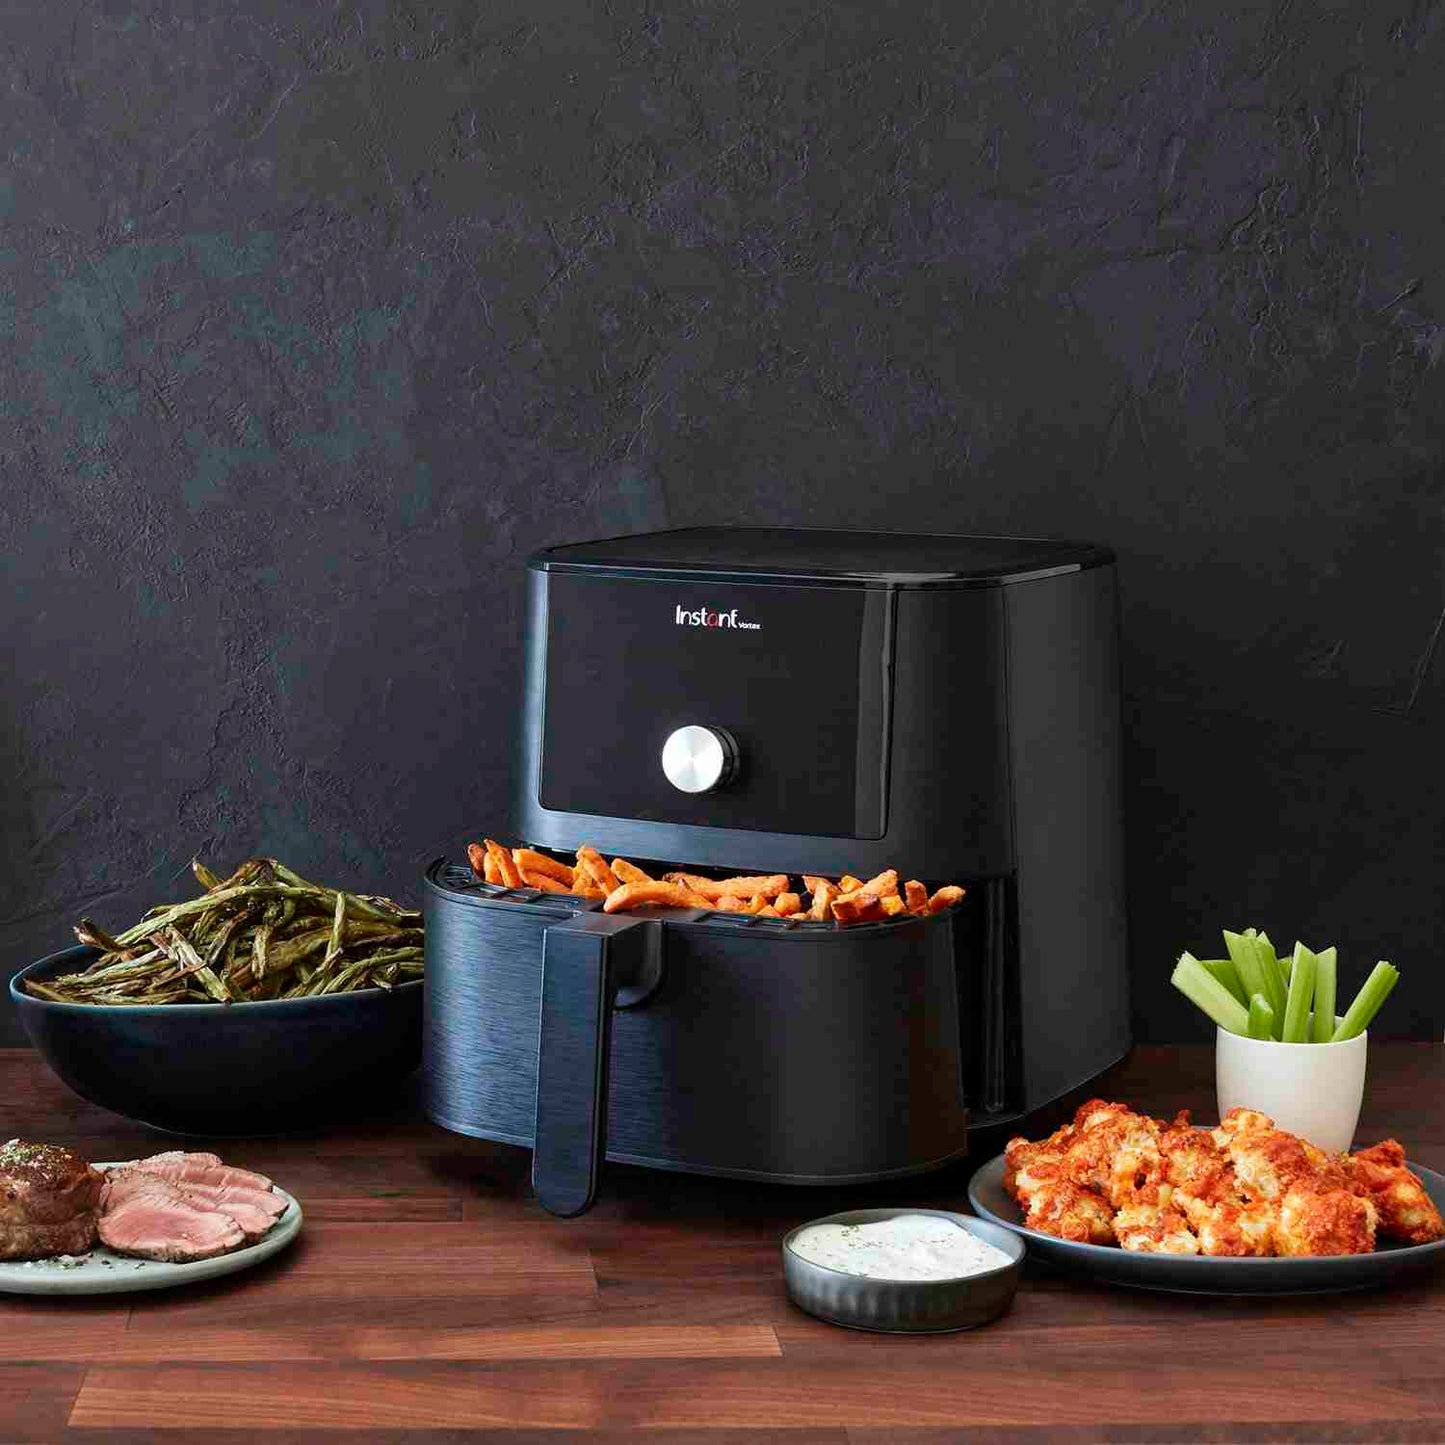 Instant Vortex 4-in-1 Digital Air Fryer, Health Air Fryer, Bake, Roast and Reheat, 1700W of Power with Timer, Non-Stick – 5.7 Litre